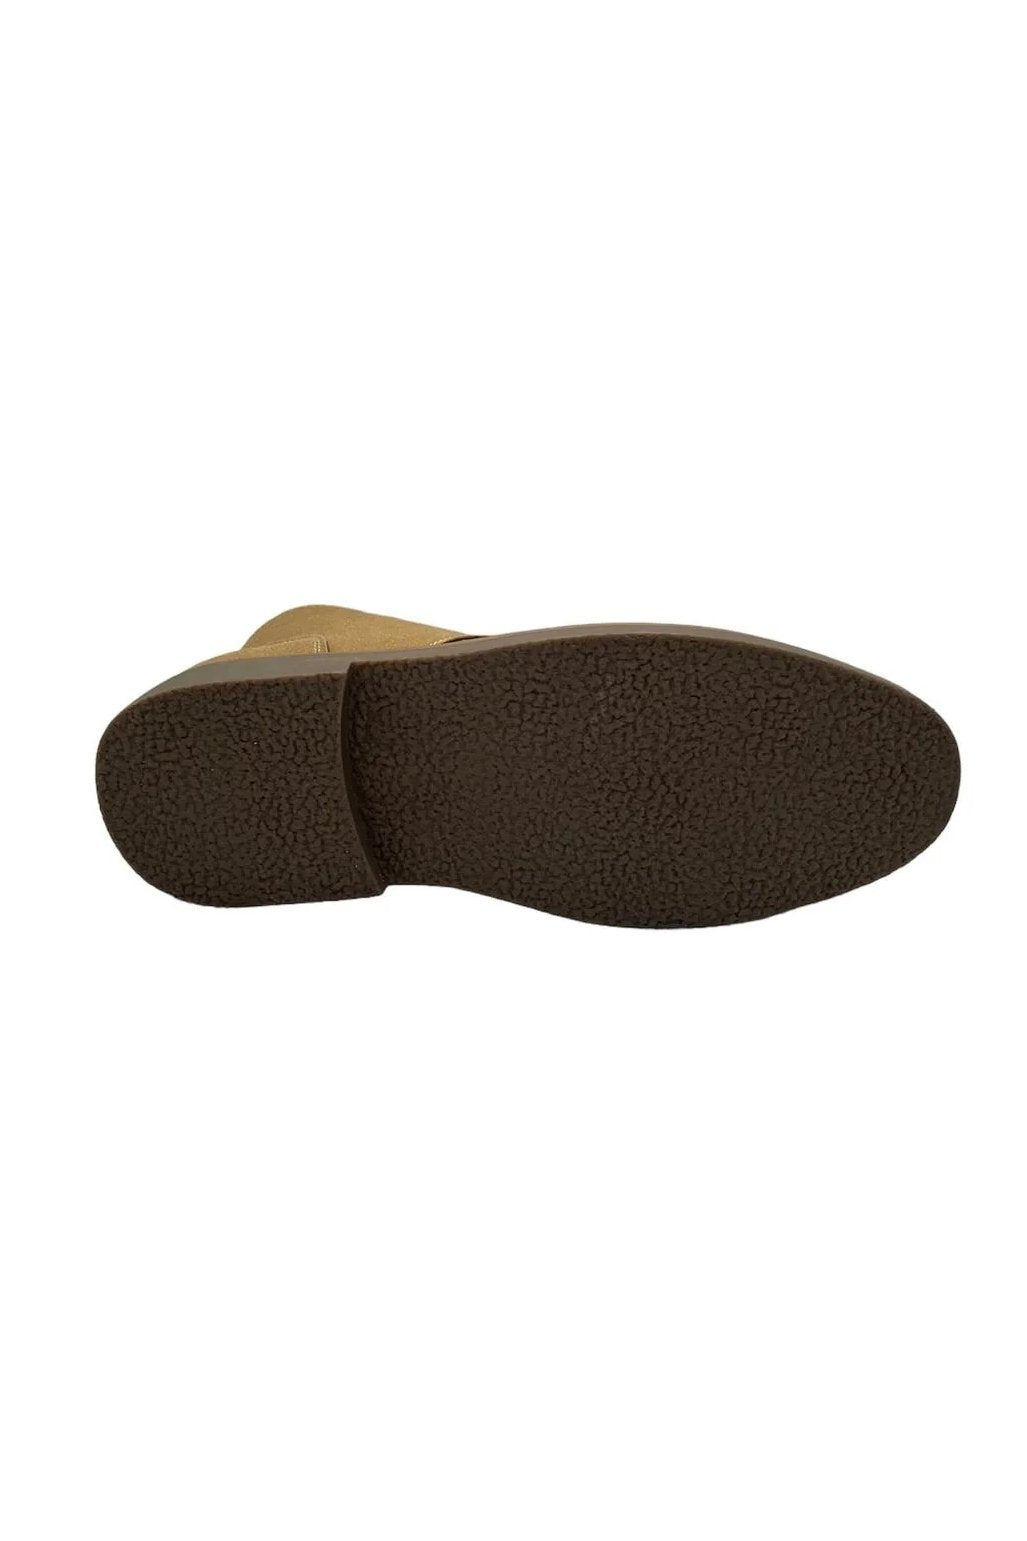 Gobi Sand Mens Boots-Sole view